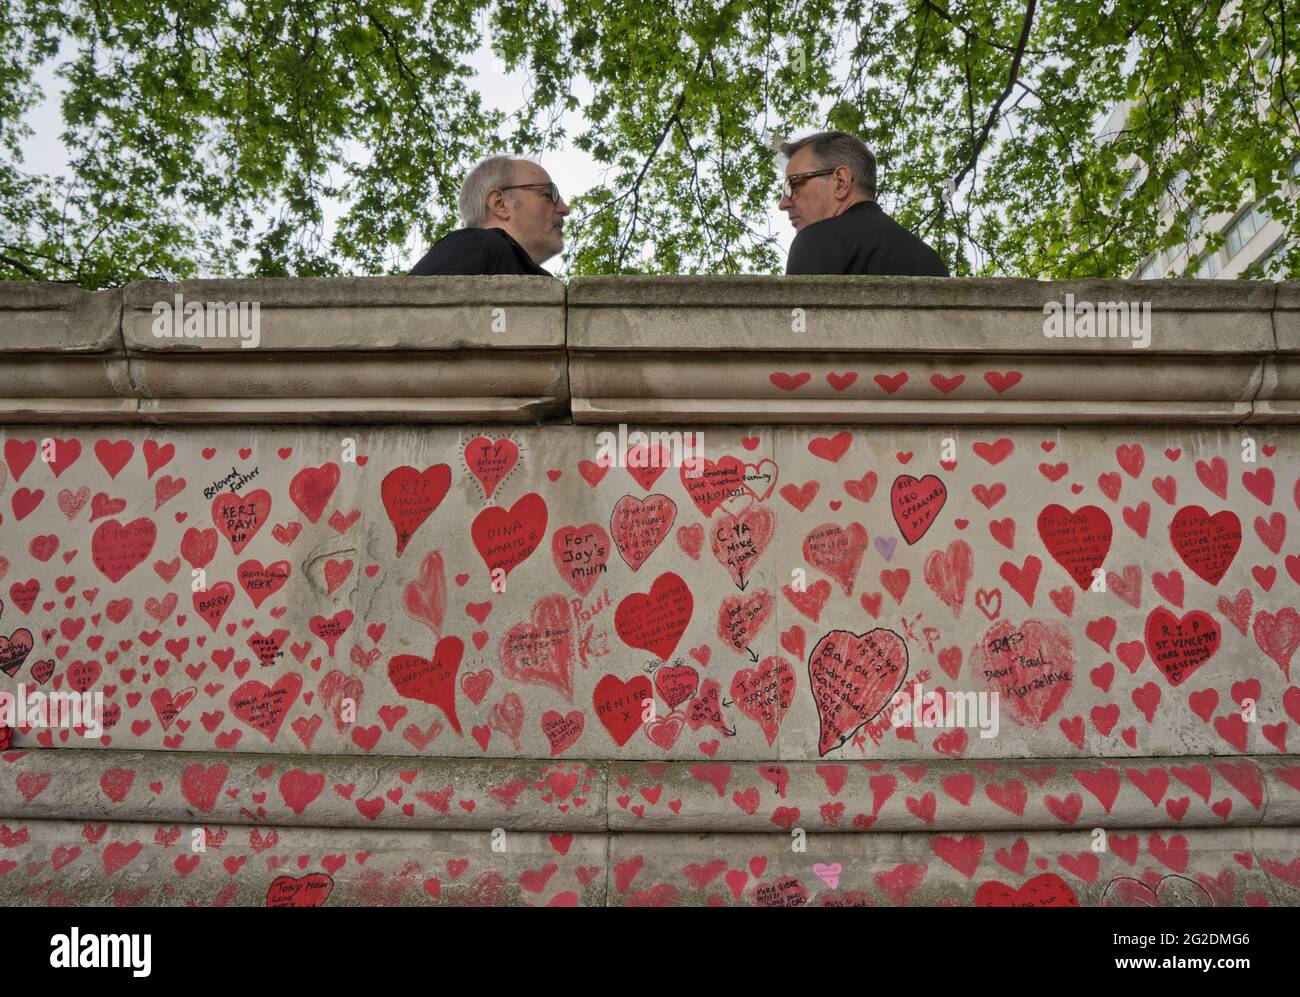 The National Covid Memorial Wall, a public mural painted by volunteers to commemorate victims of the COVID-19 pandemic in the United Kingdom. It is on the South Bank of the River Thames in London, opposite the Palace of Westminster, London, England, UK. Stock Photo